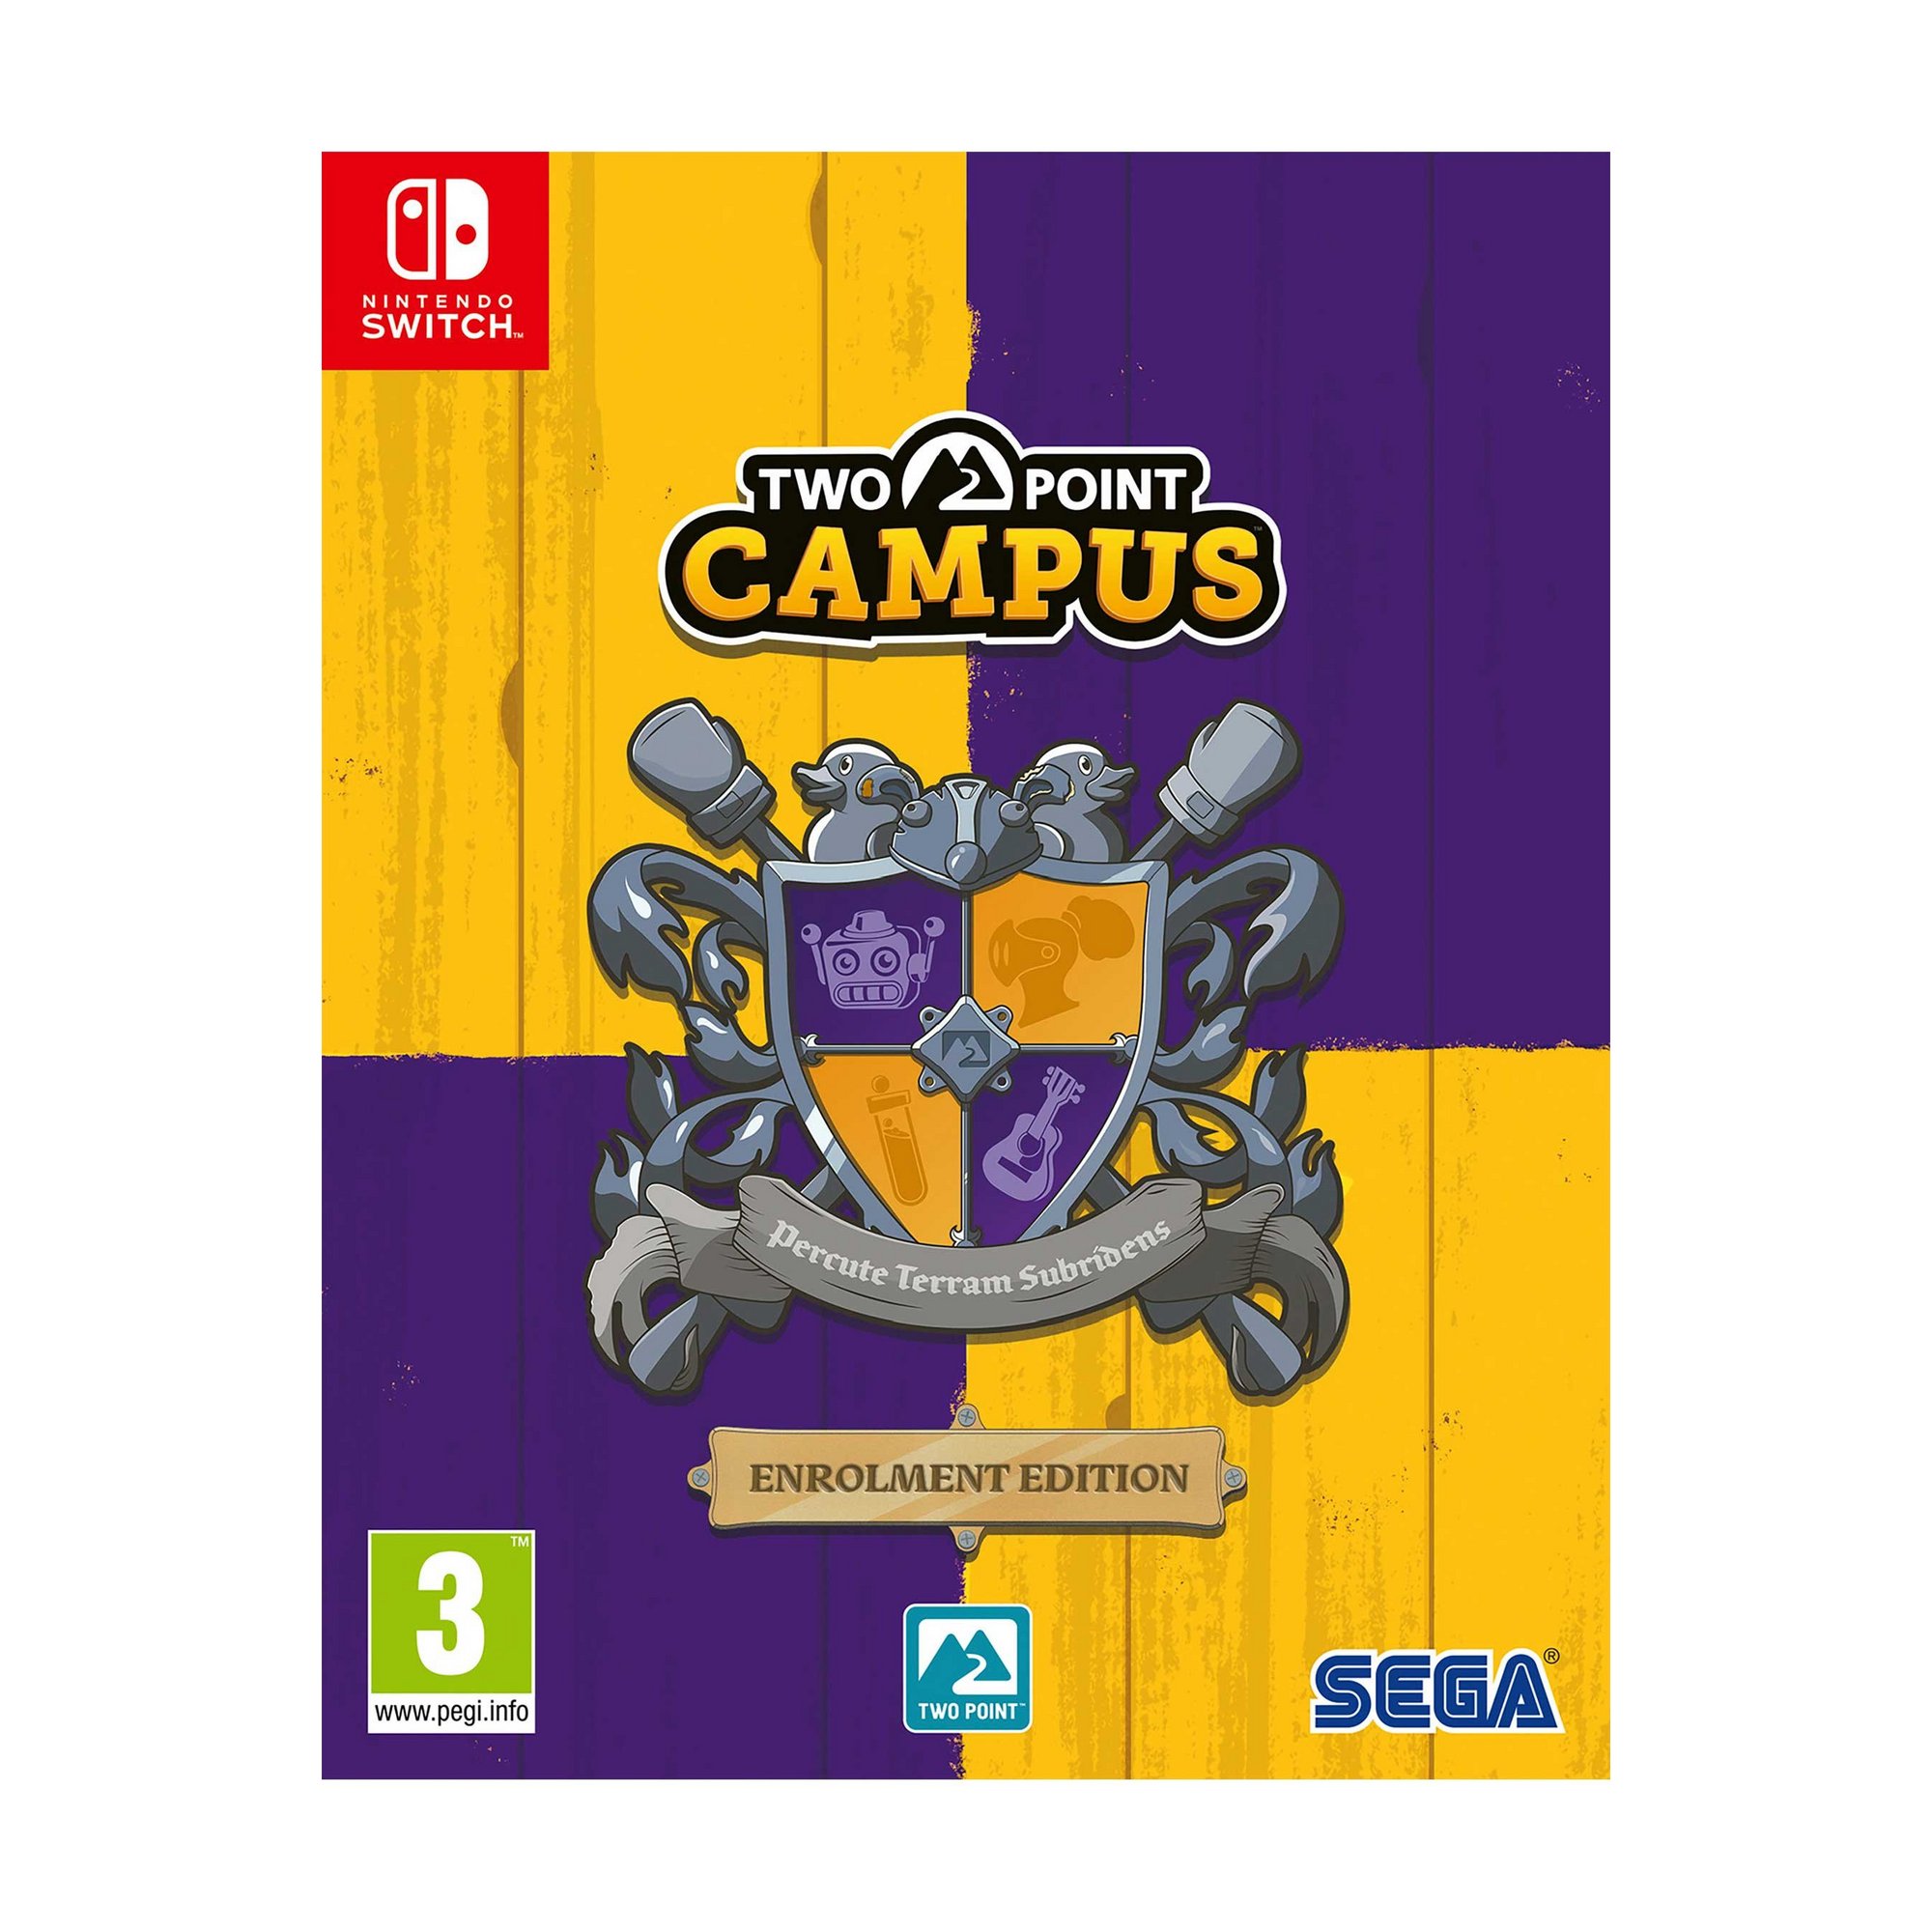 Nintendo Switch: Two Point Campus Enrolment Edition